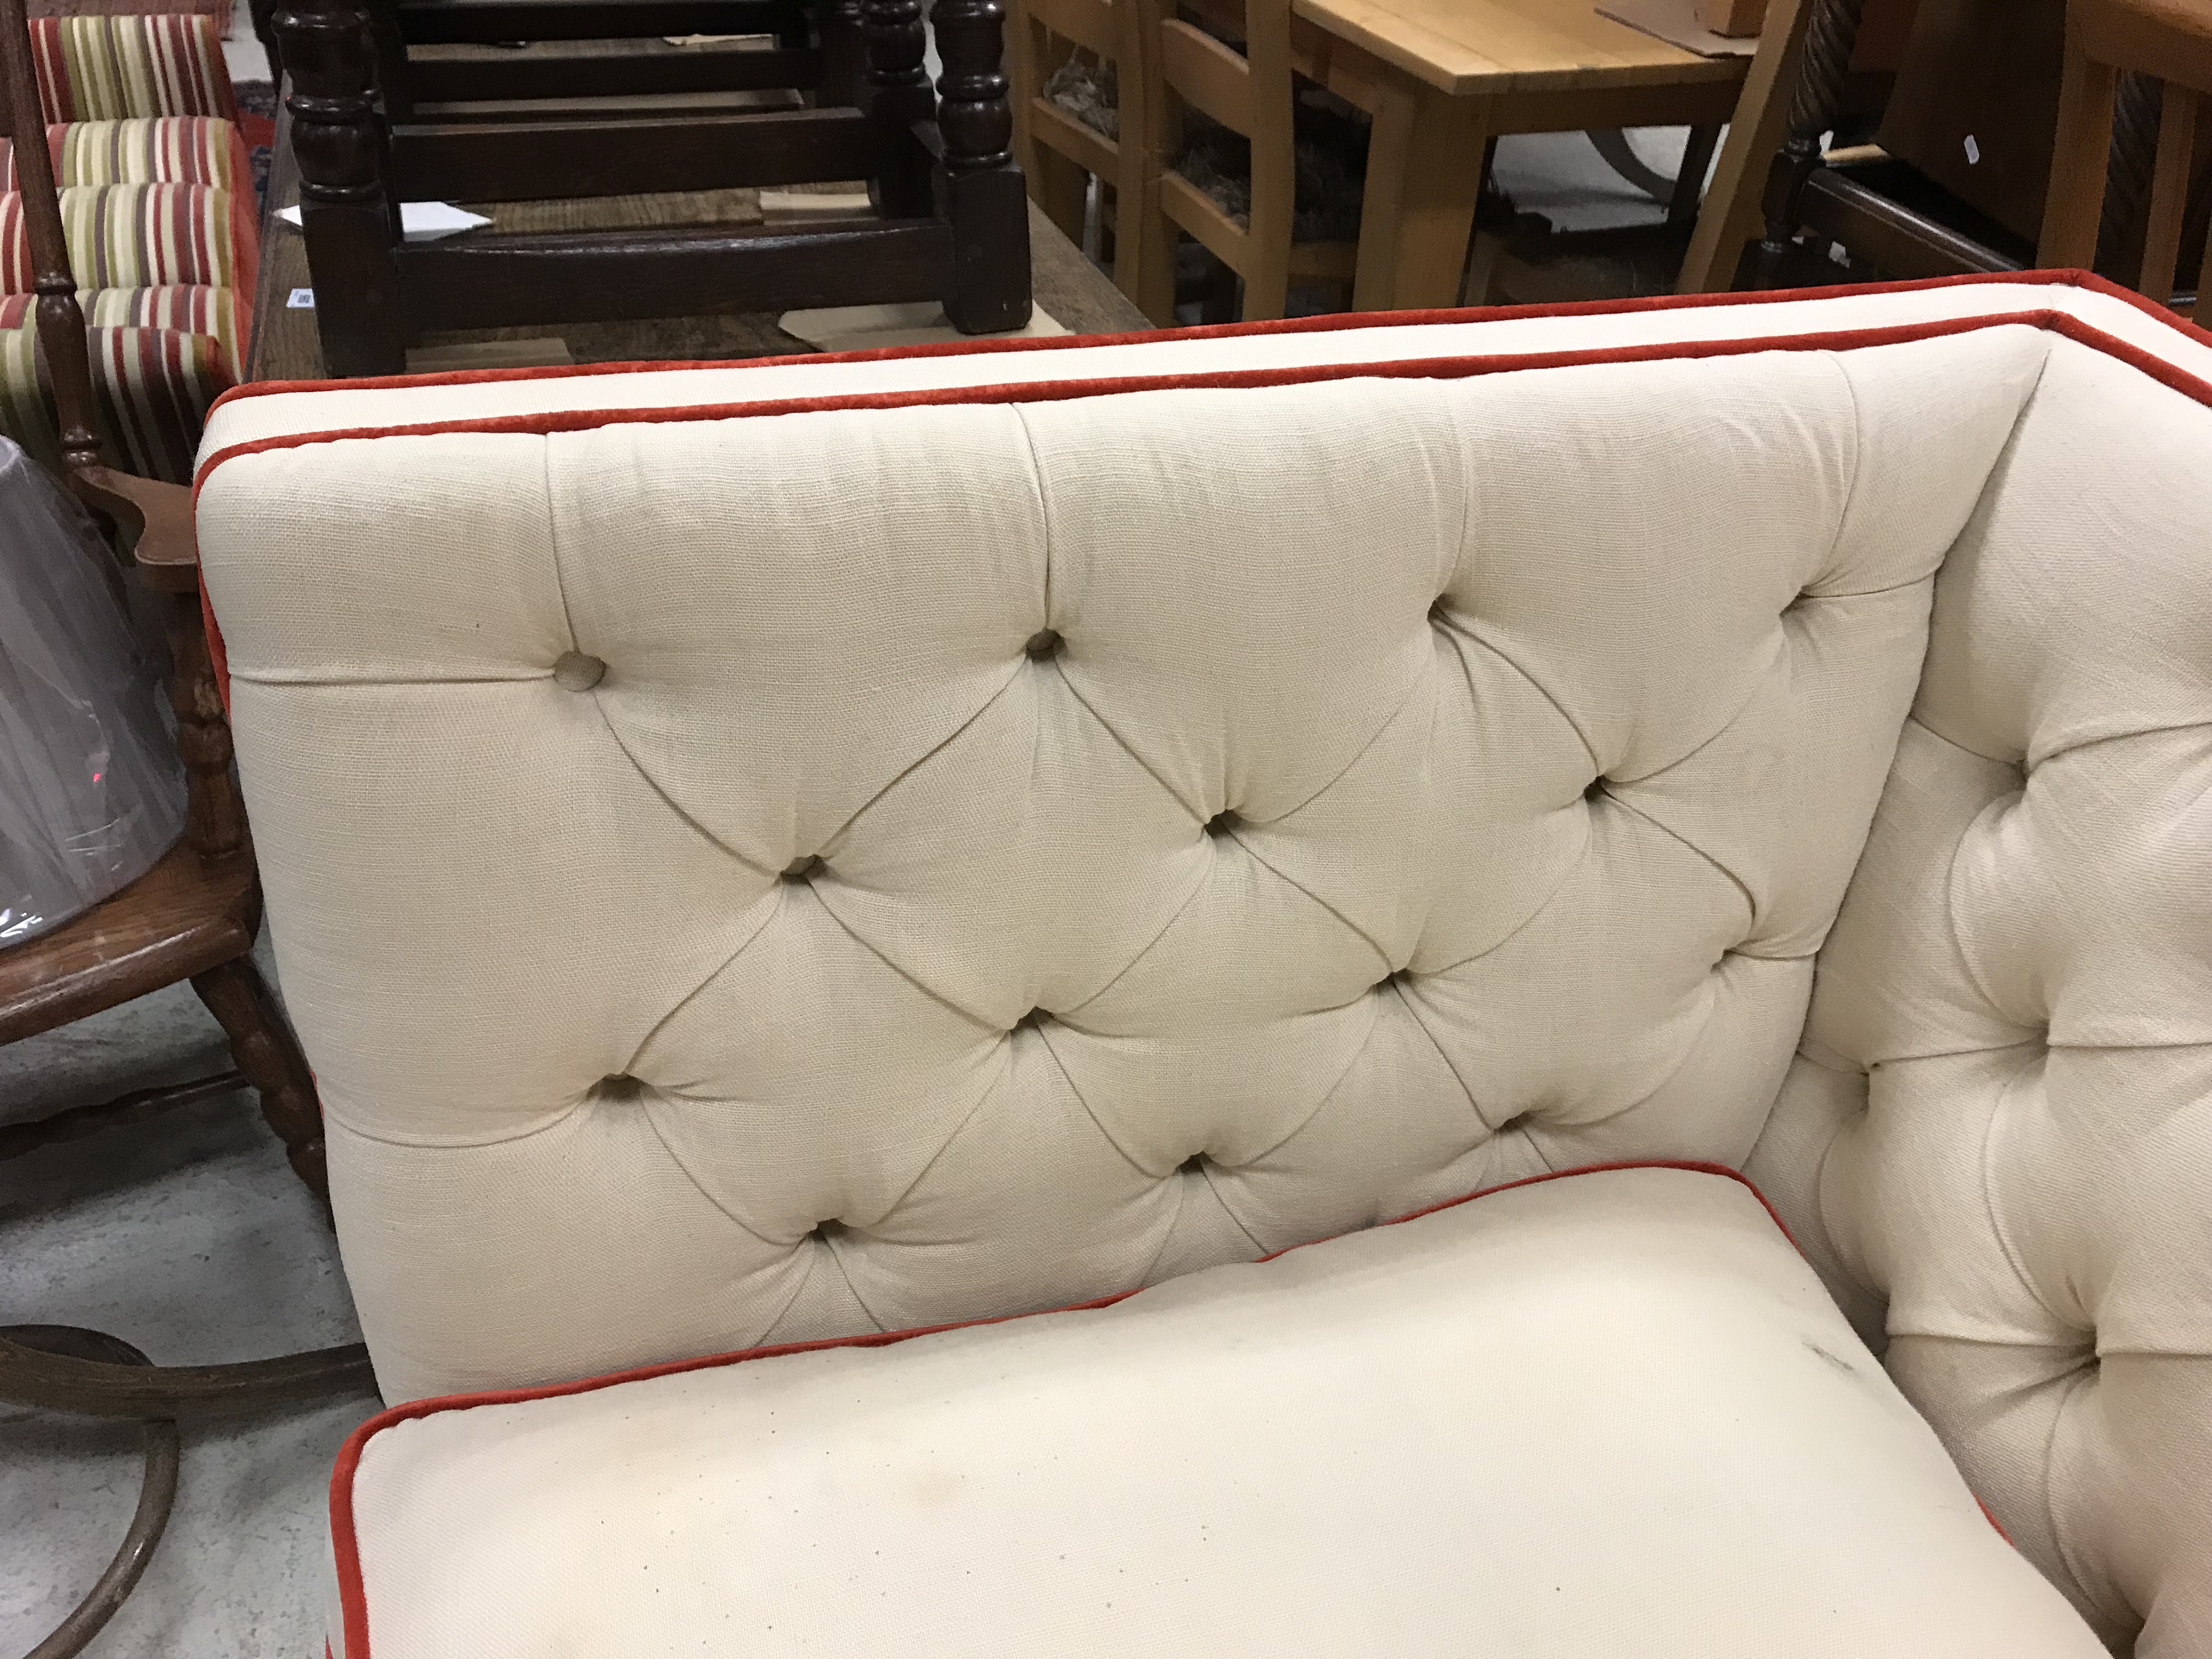 A Lawson Wood cream buttoned knowle style three seat sofa with scarlet velvet piping, - Image 2 of 26